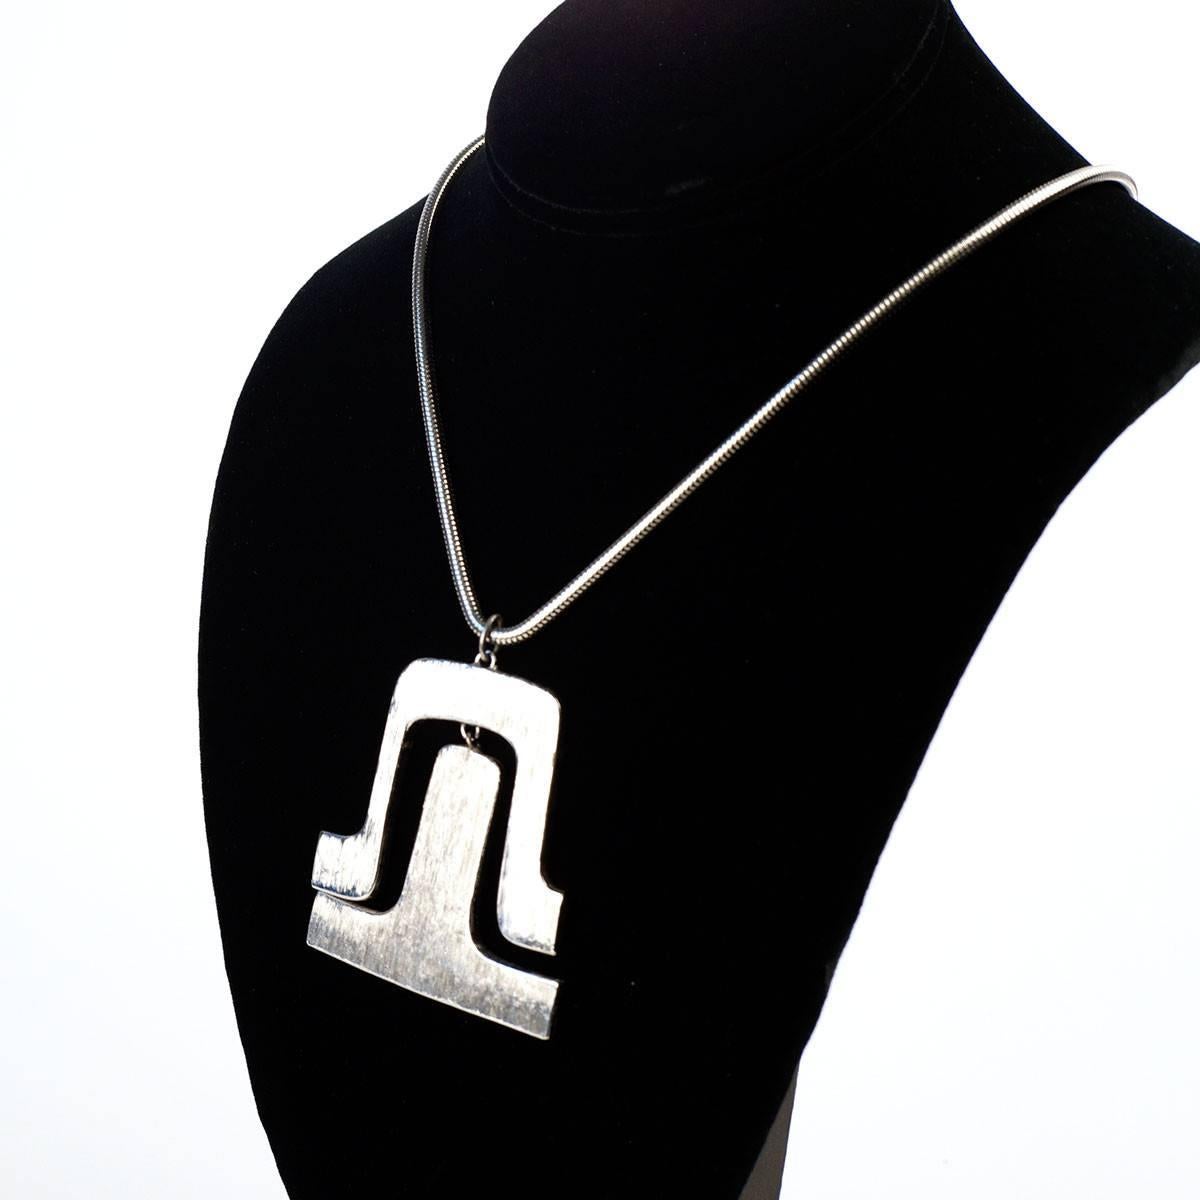 Pierre Cardin silver brushed metal necklace with abstract pendant.

Made In Italy. 

-Measurements-
Necklace: 10.5